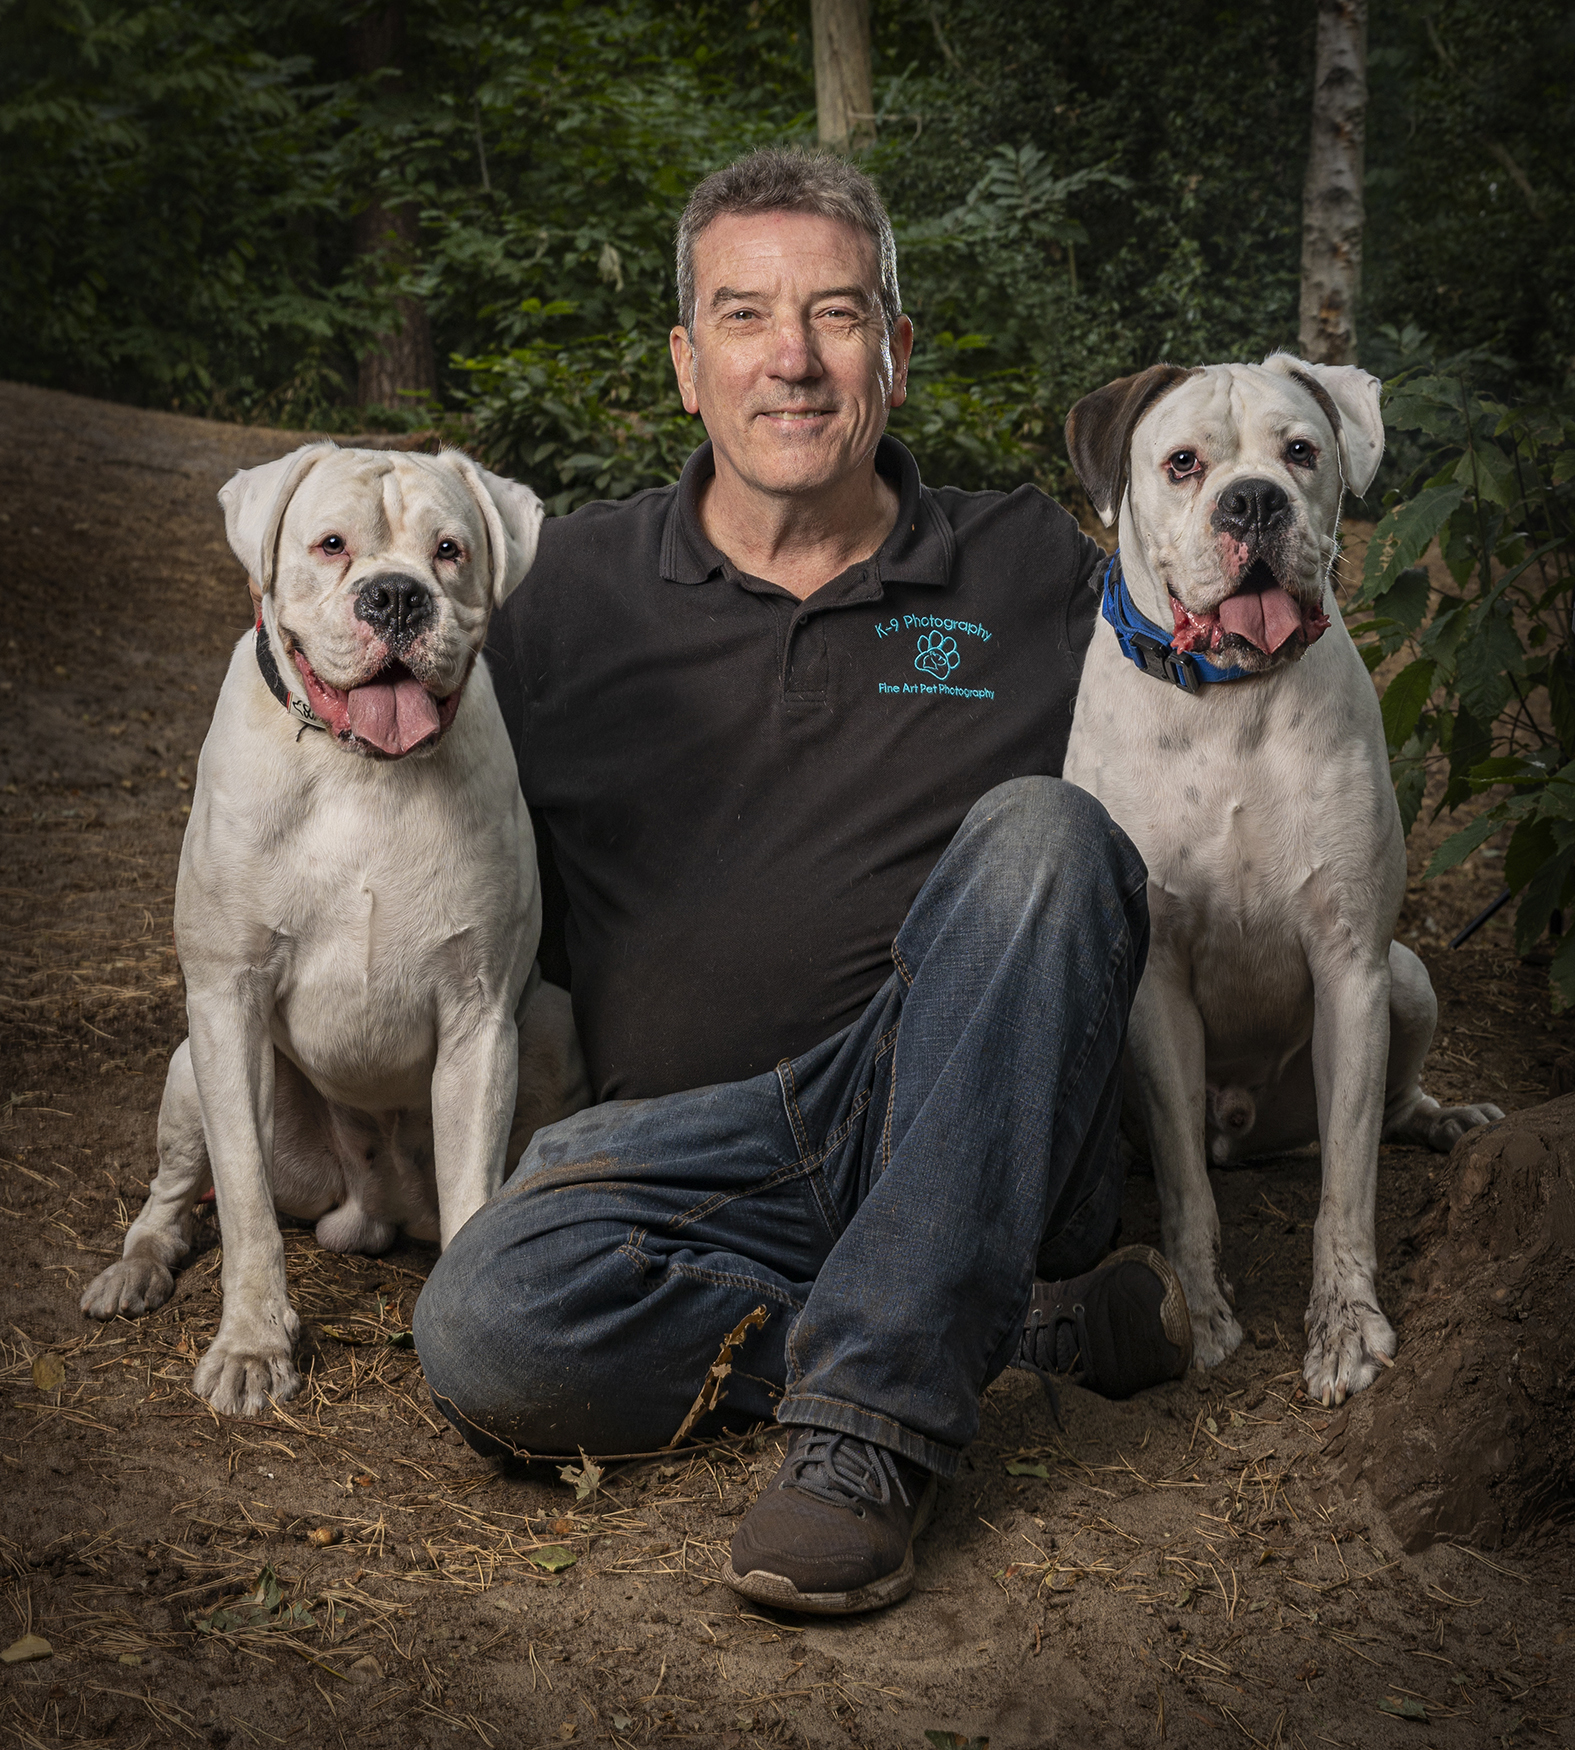 I’m Adrian Bullers the dog photographer - here to give you the gift of memories with my award winning dog photography